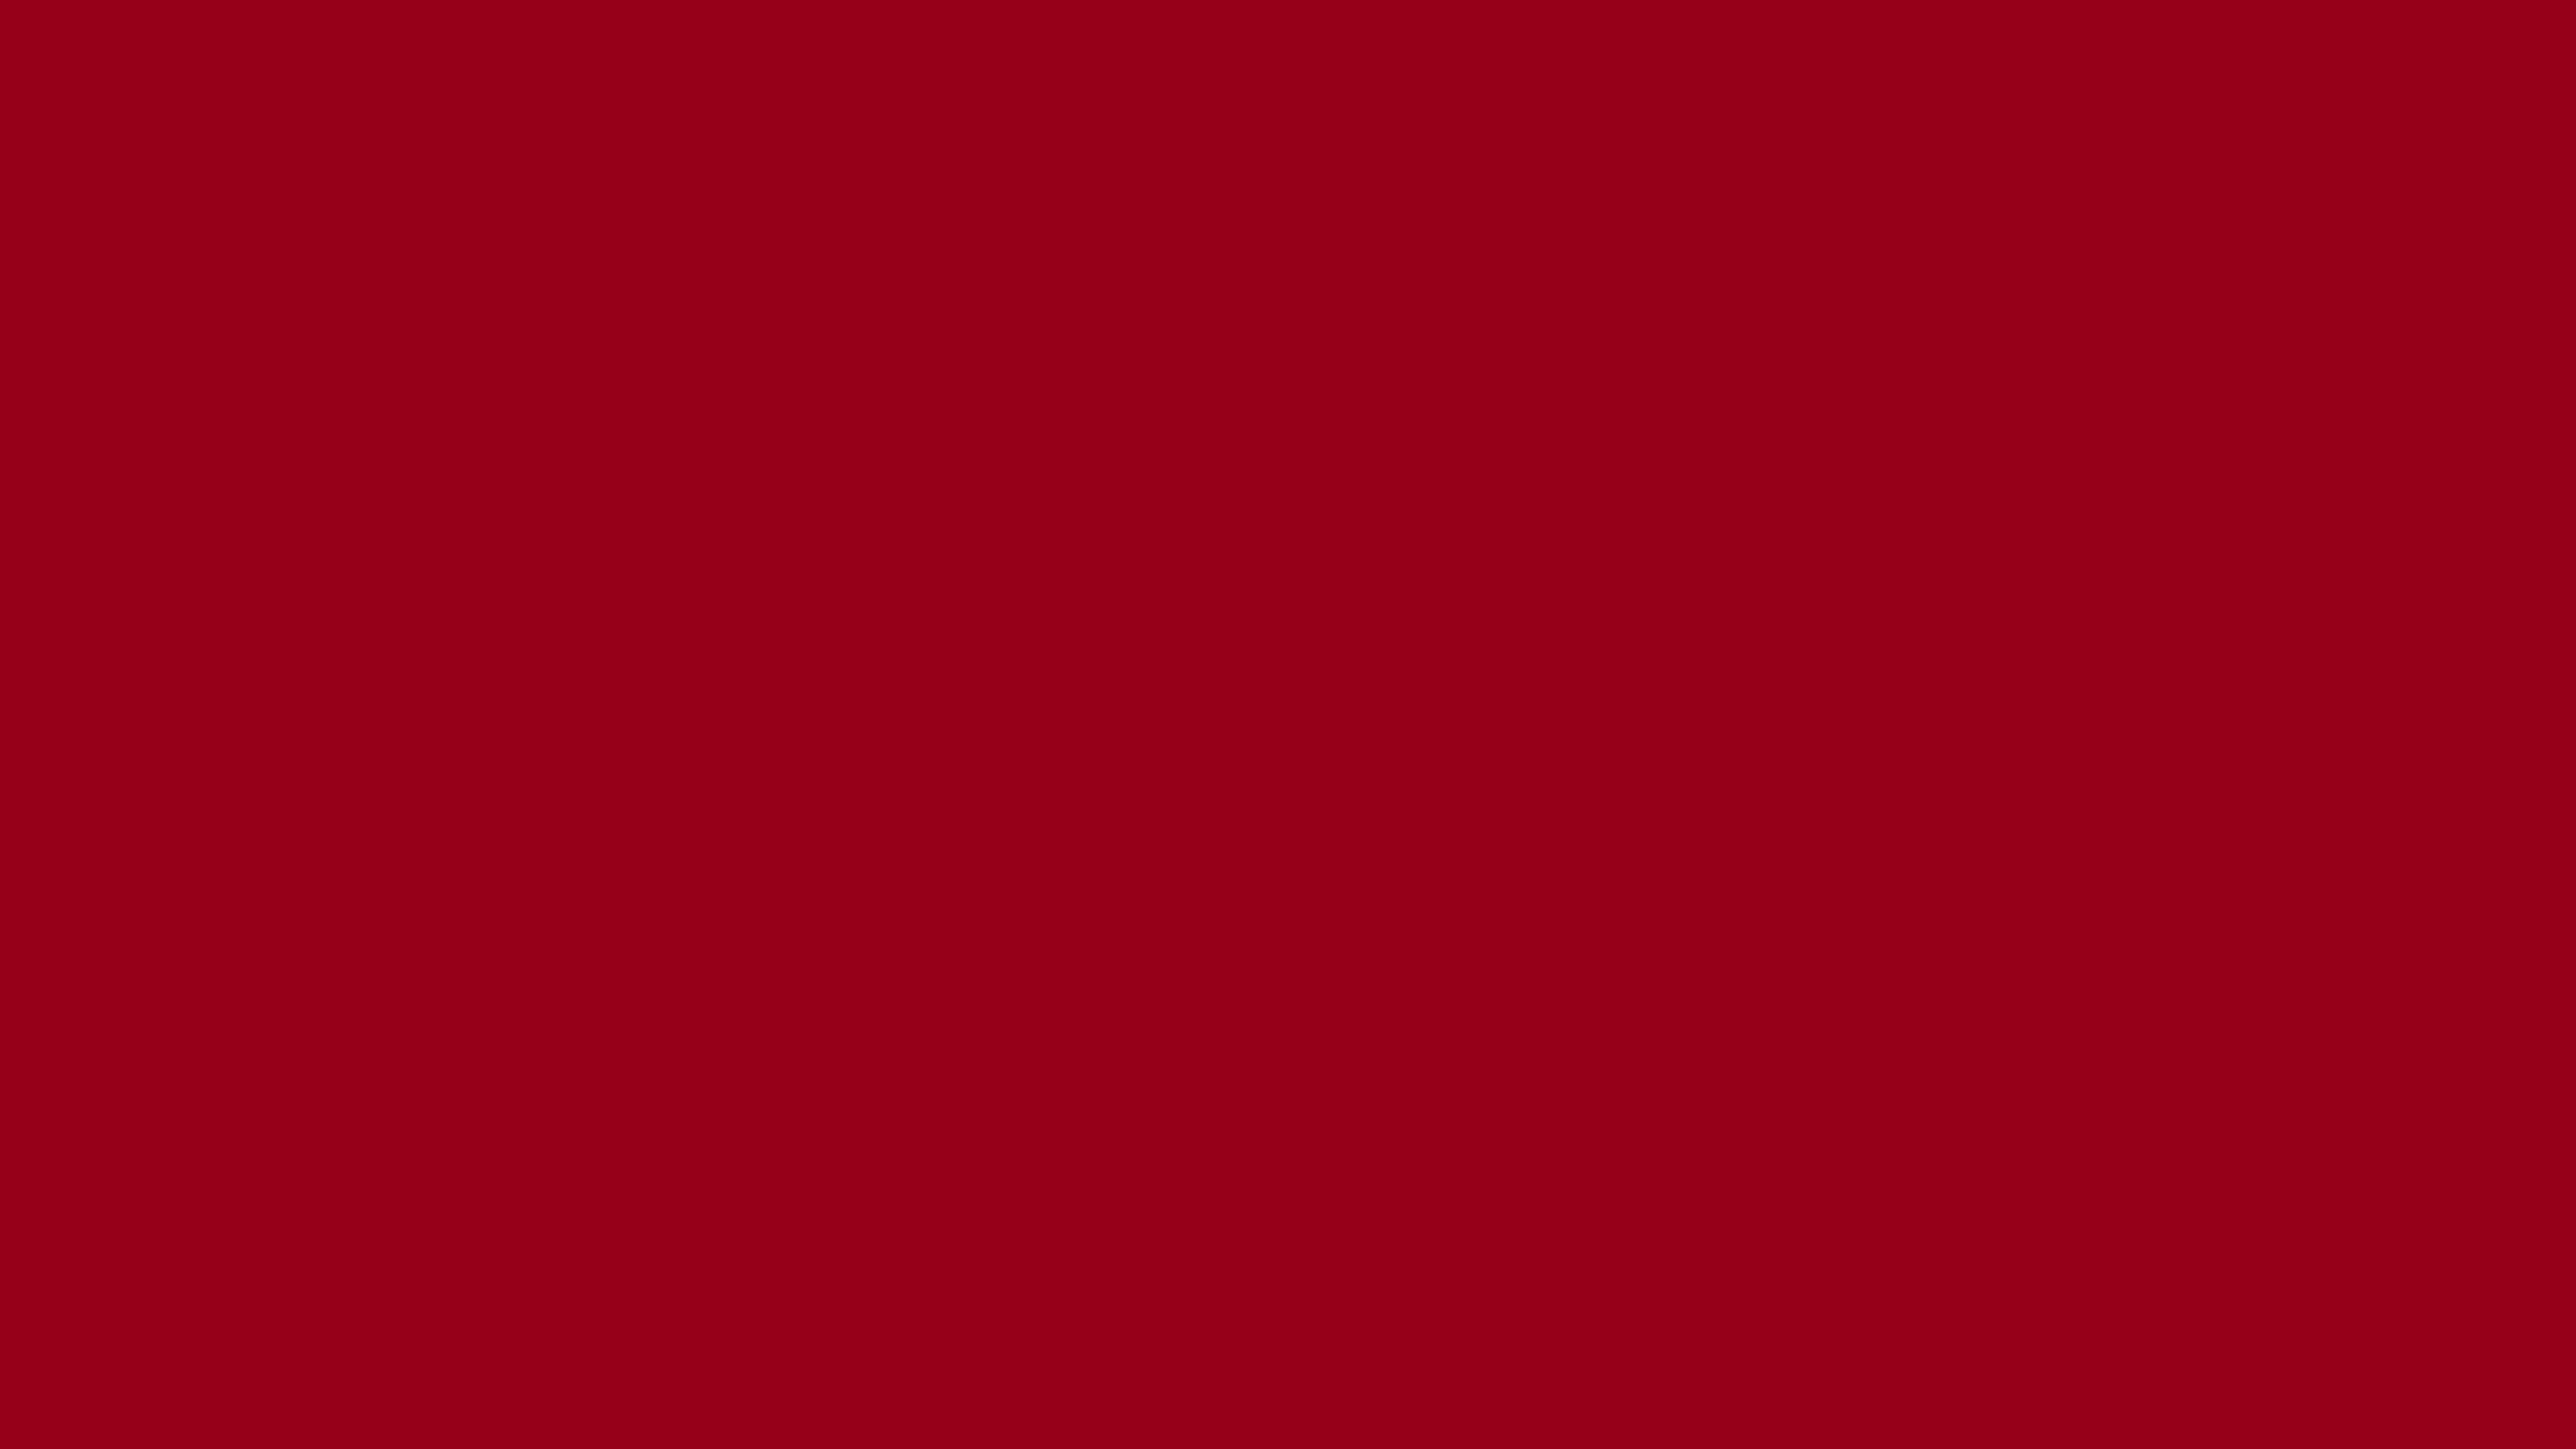 5120x2880 Carmine Solid Color Background